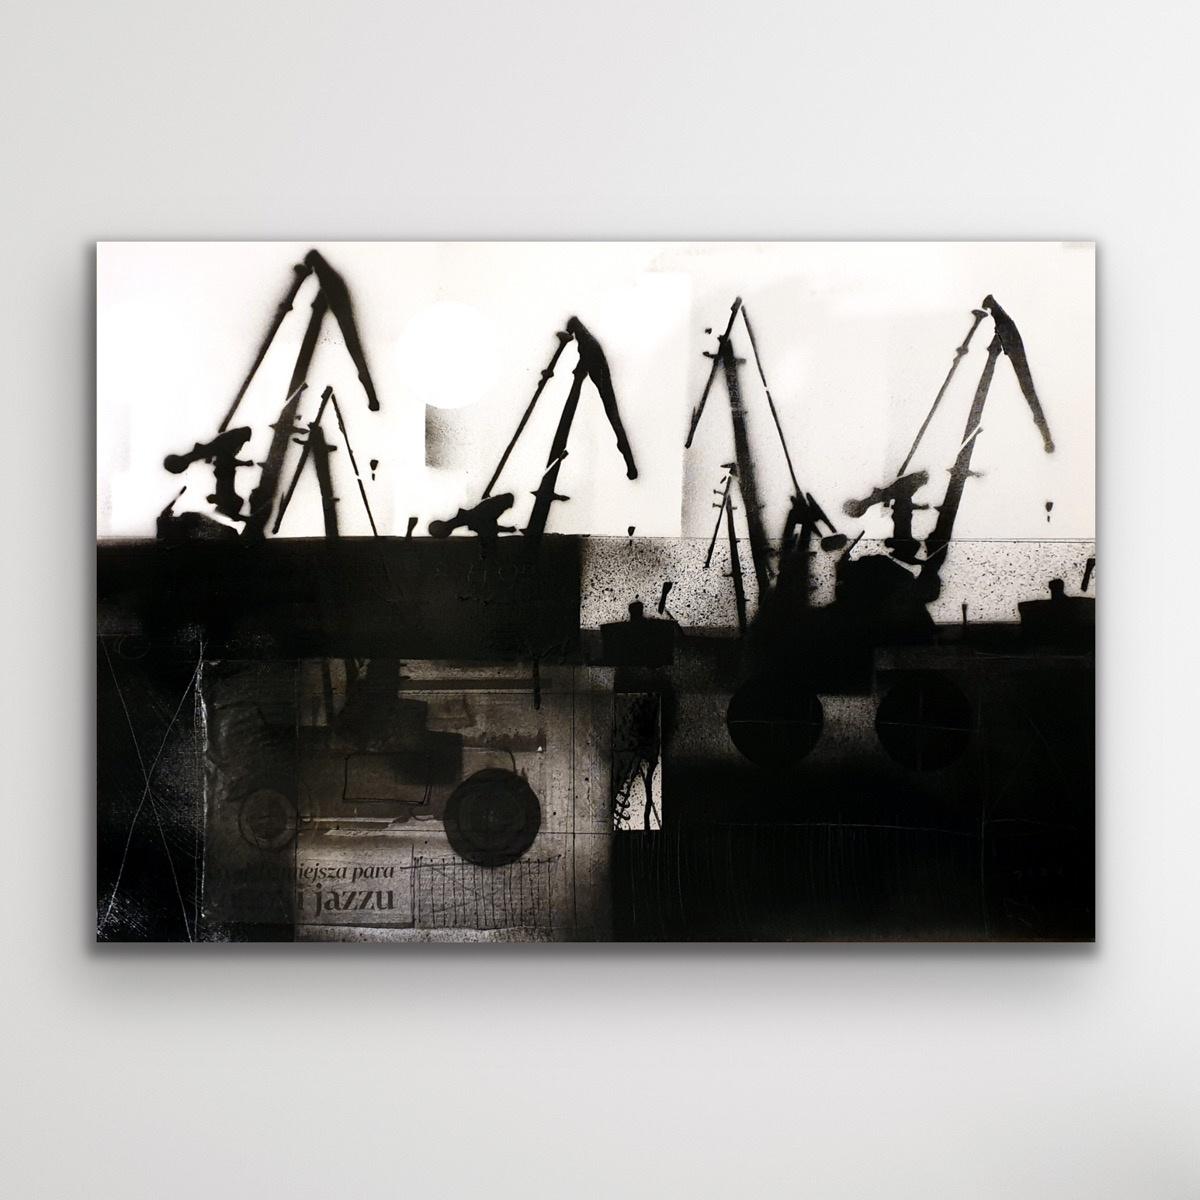 Cranes 4 - Black & white painting, Mixed media, Collage, Polish art For Sale 4